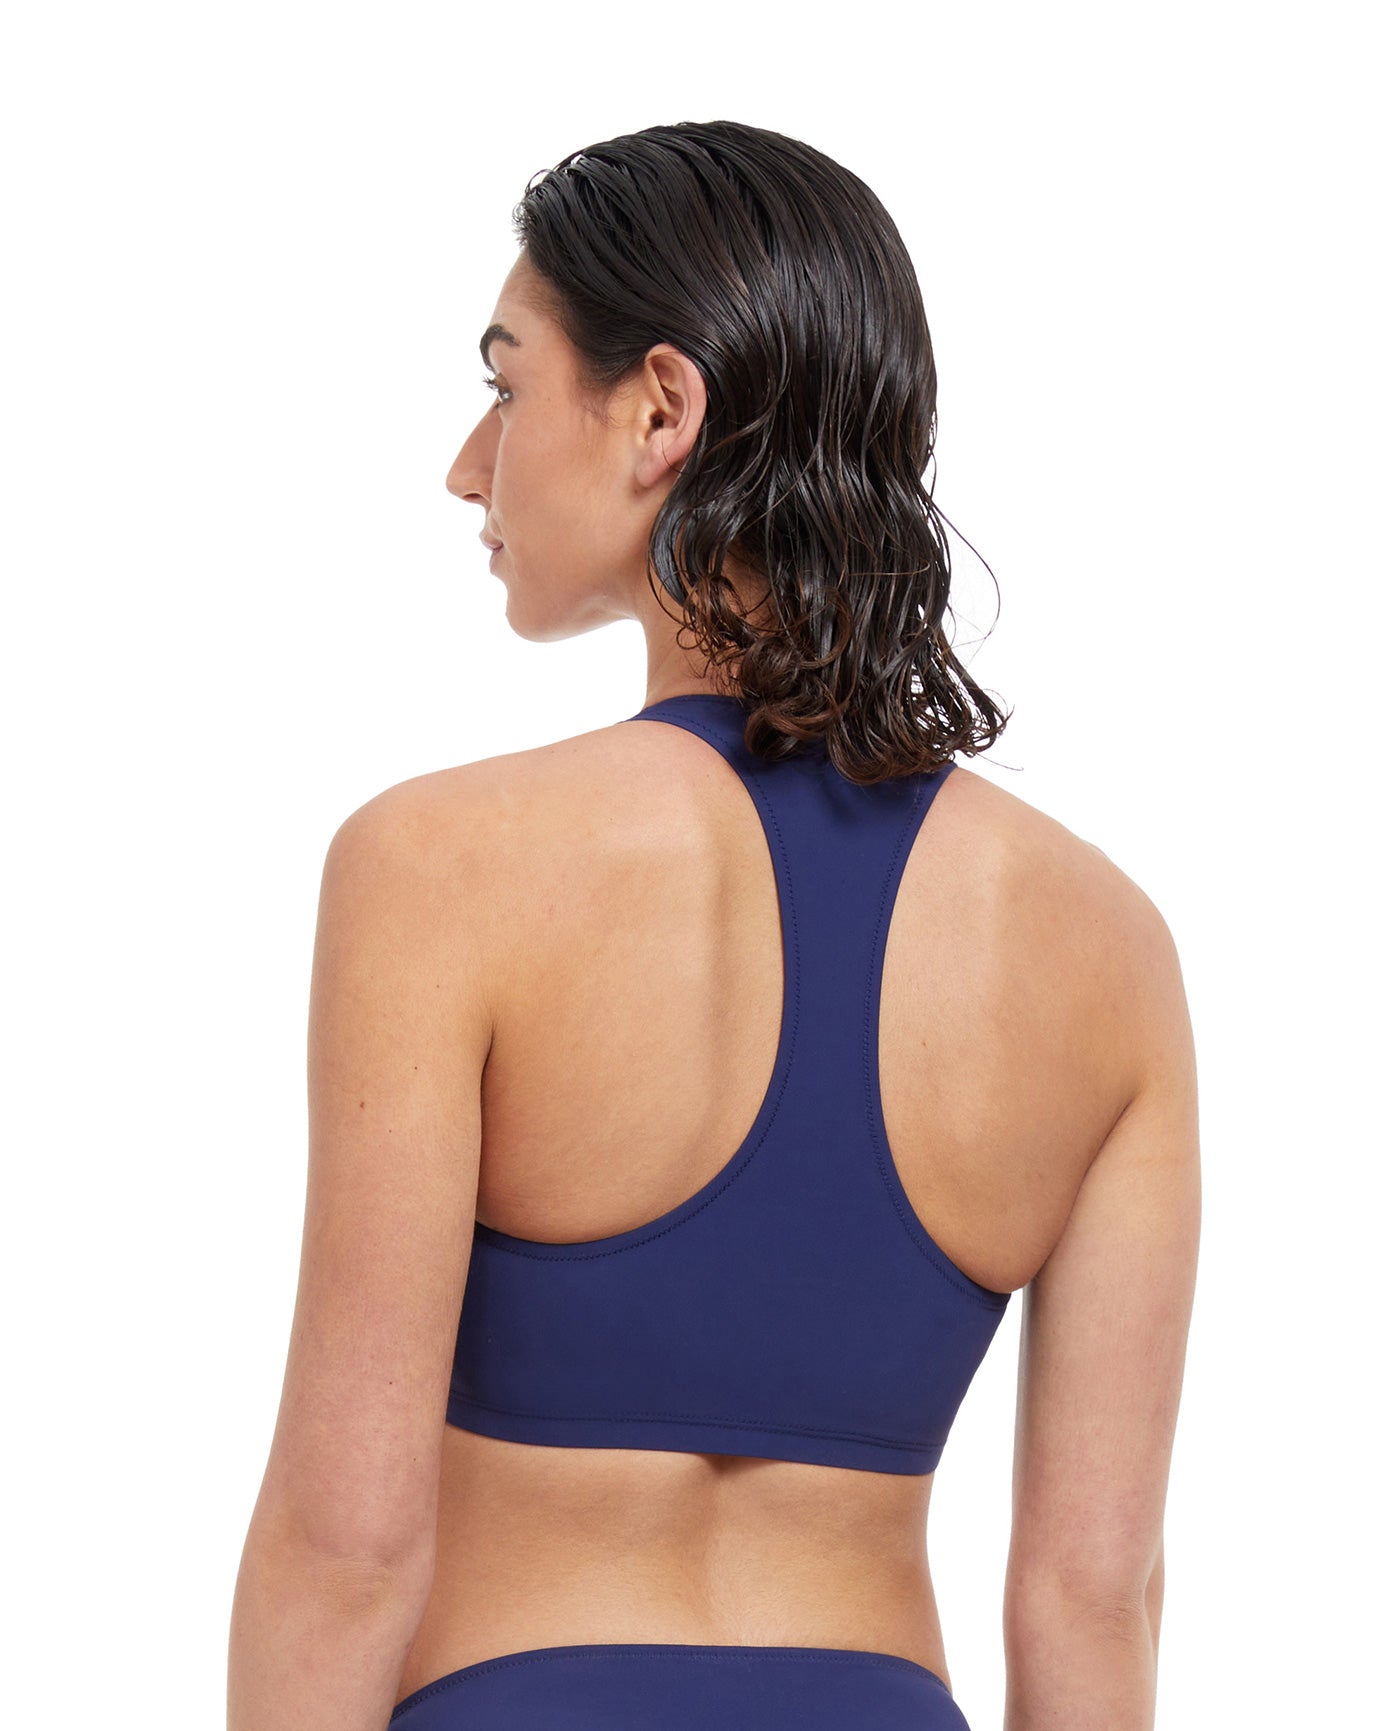 Back View Of Free Sport Olympic Dream High Neck V-Back Bikini Top | FREE SPORT OLYMPIC DREAM